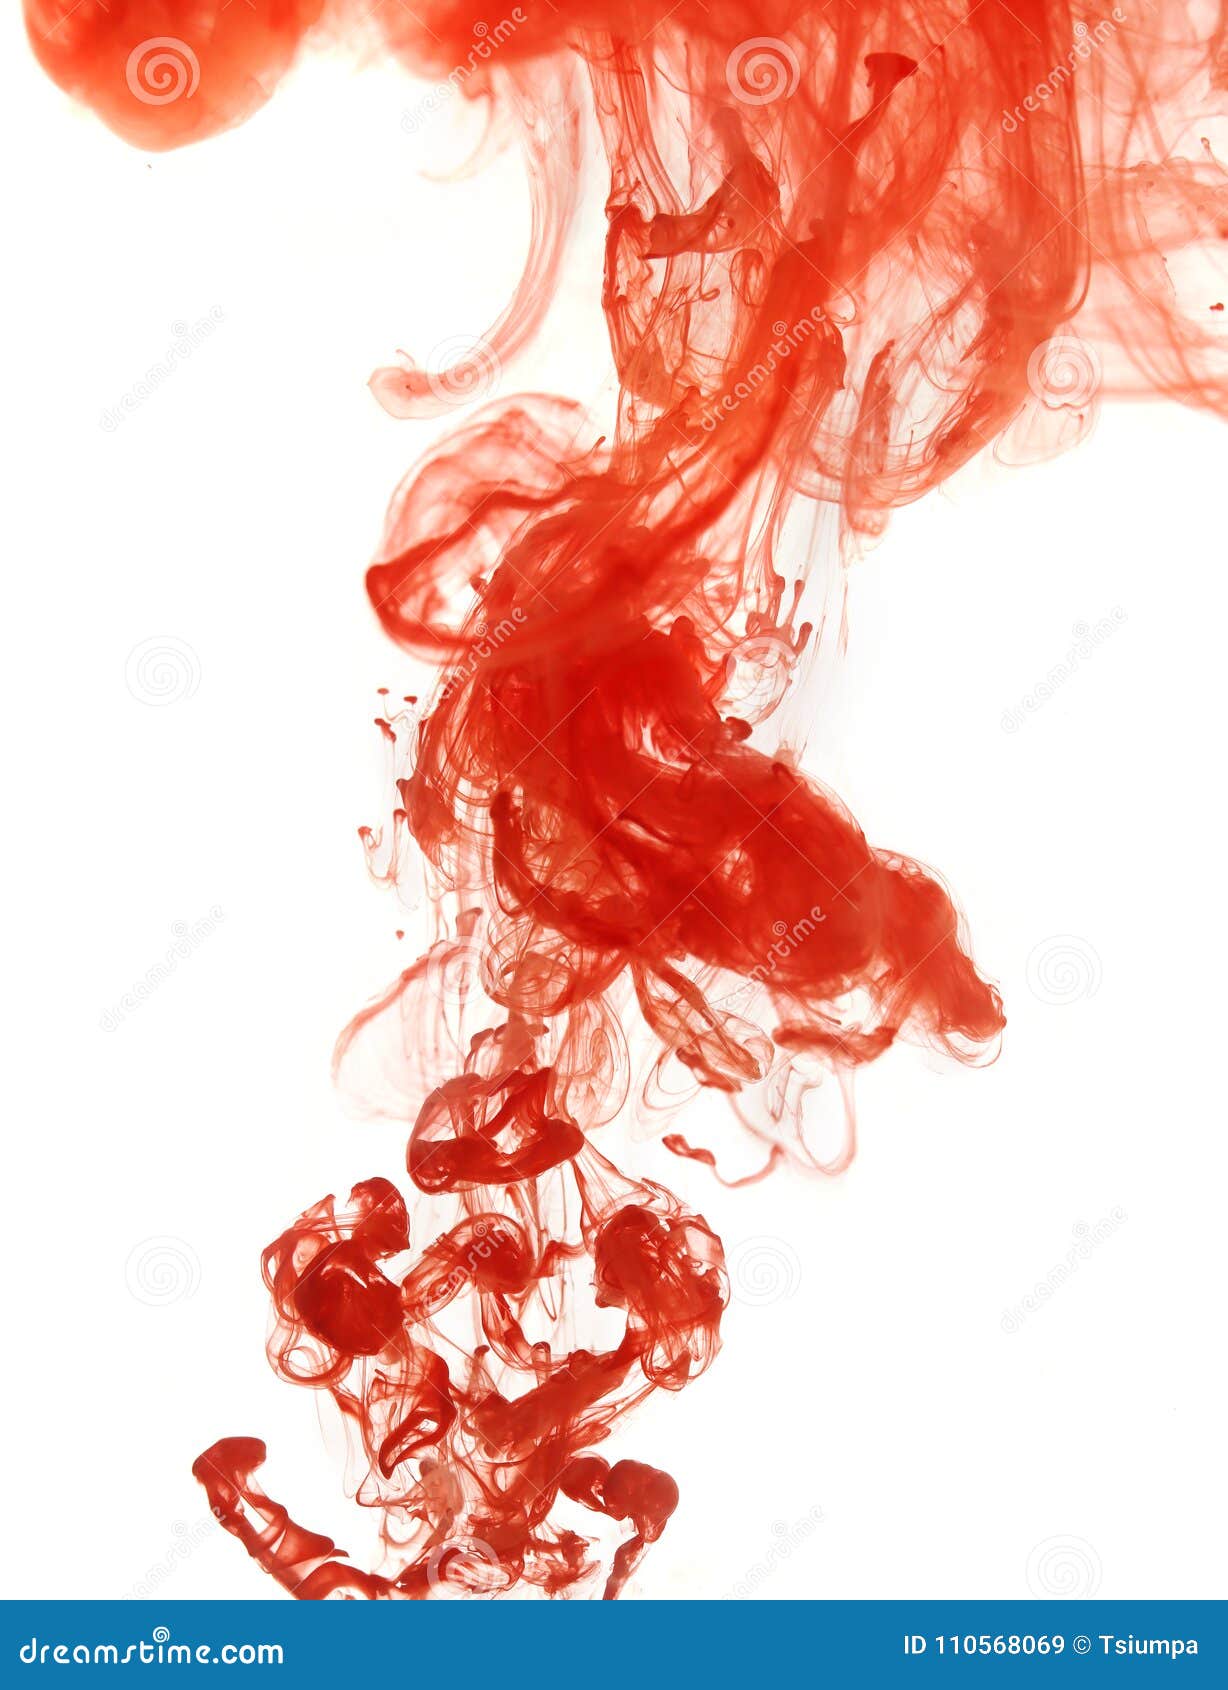 Red ink into the water stock image. Image of drop, science - 110568069